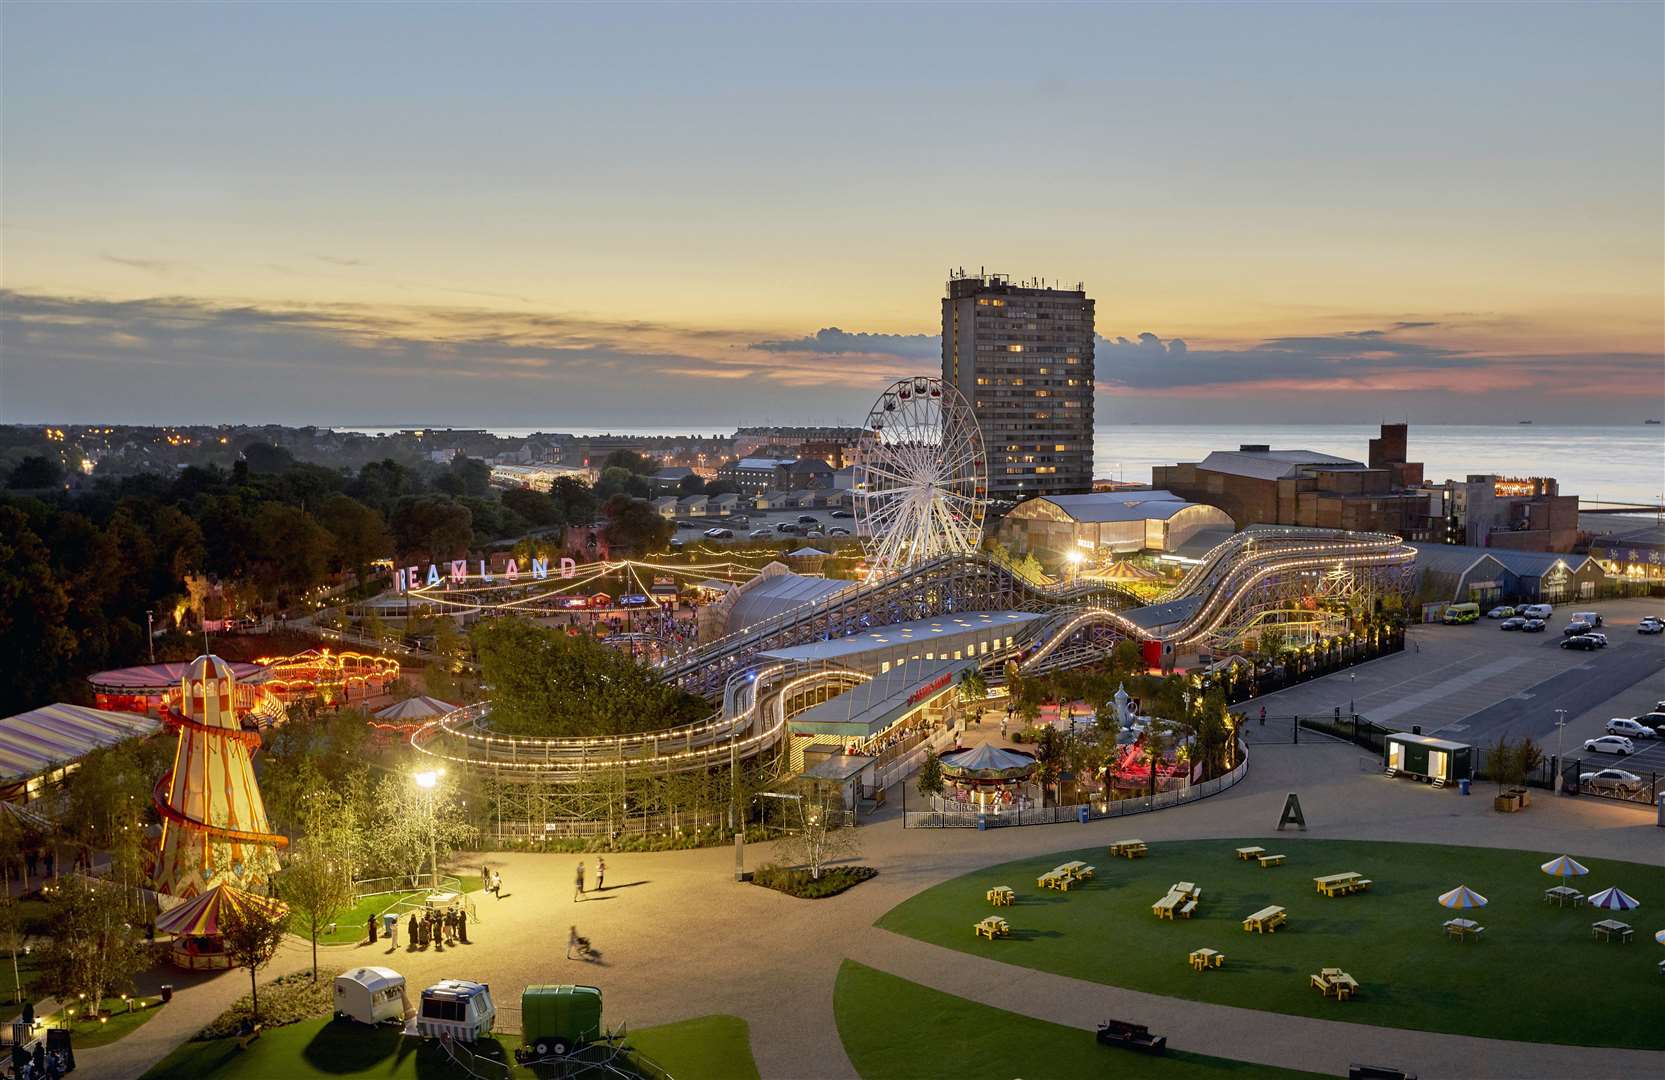 Dreamland in Margate has been sold